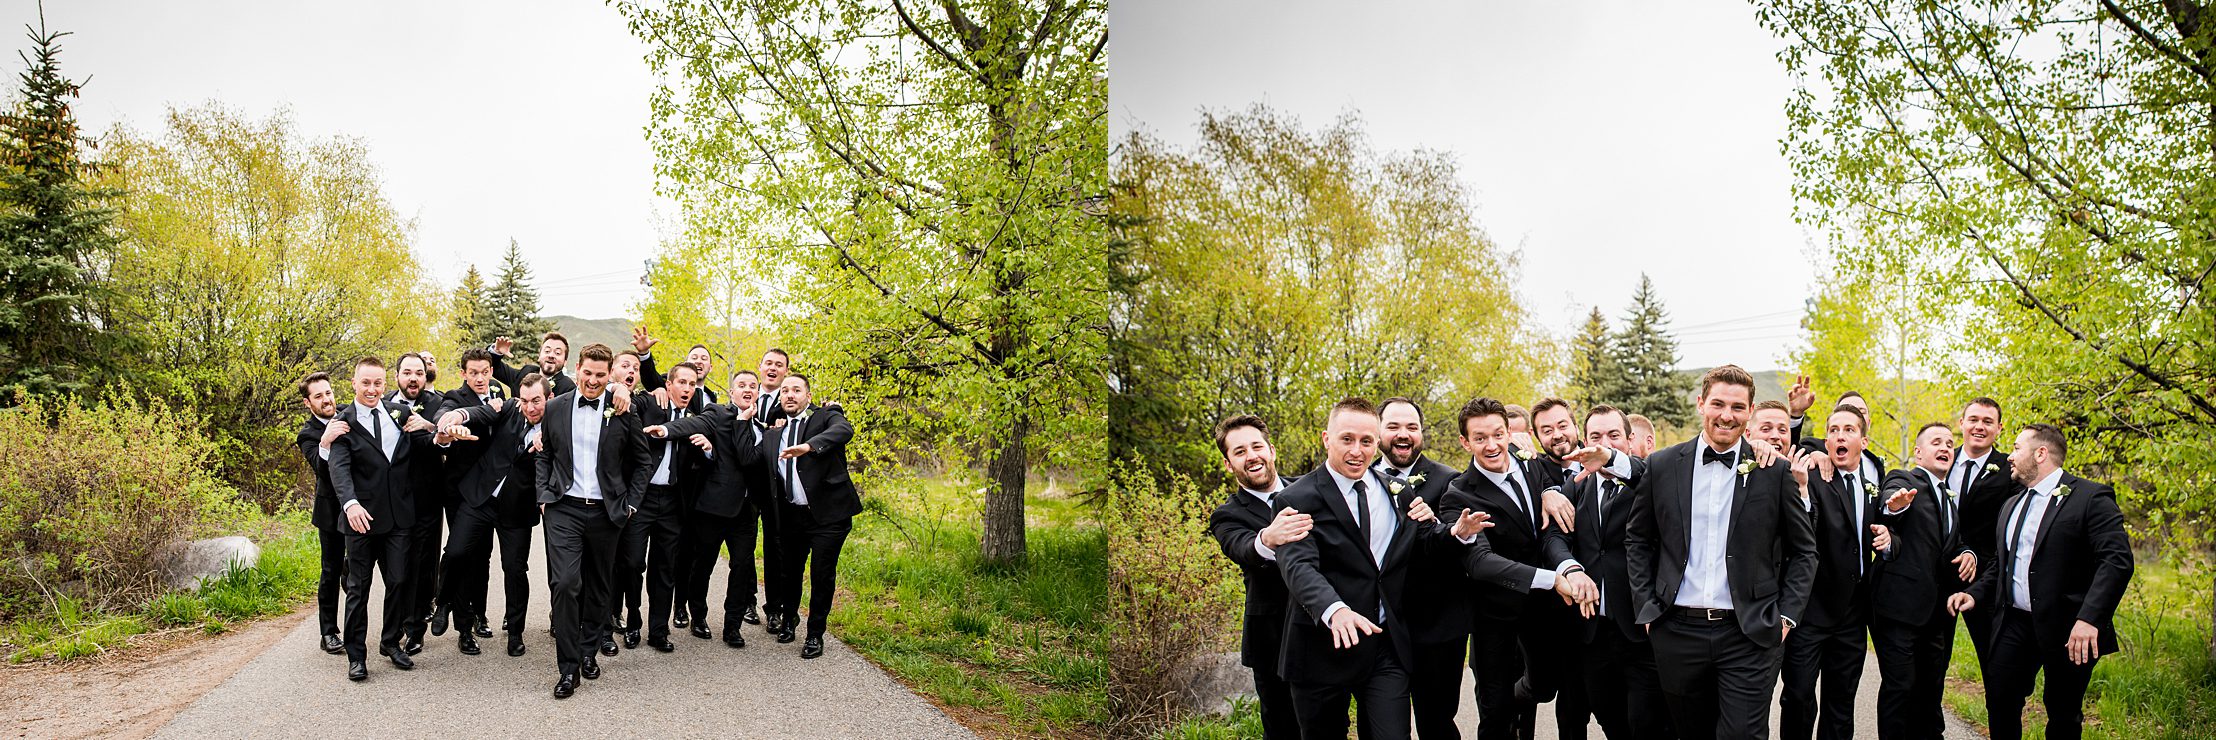 groomsmen walking on the trail behind the Westin Riverfront